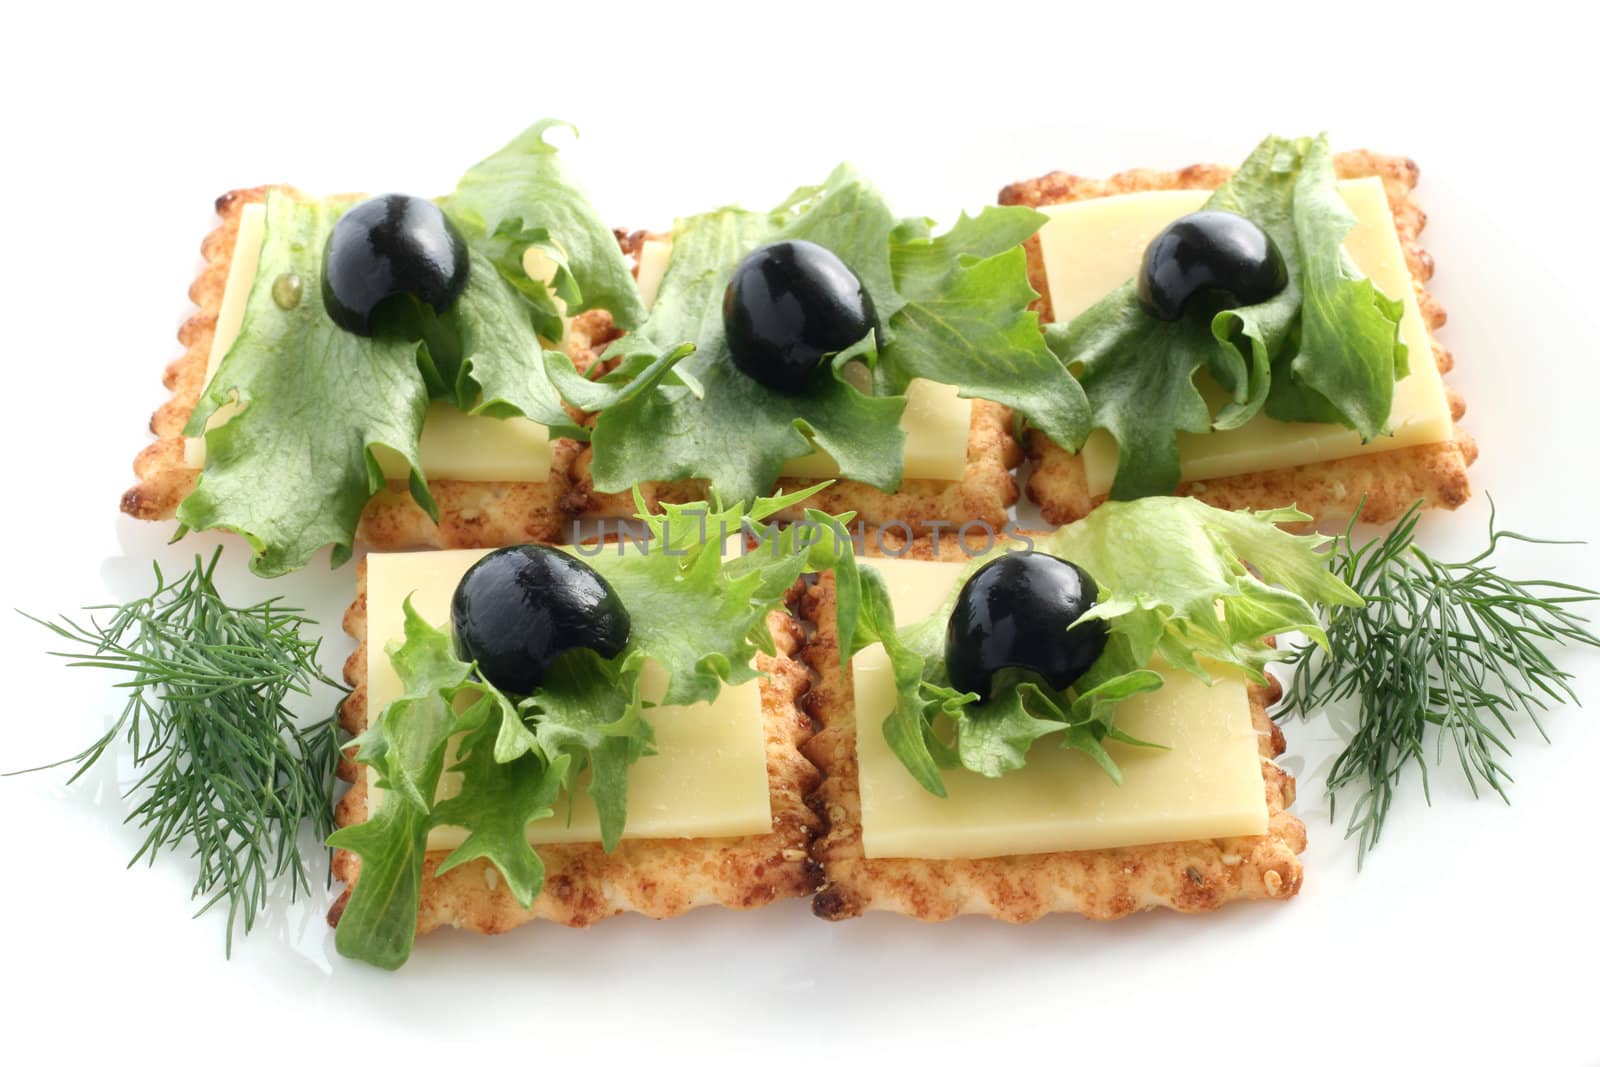 toasts with cheese